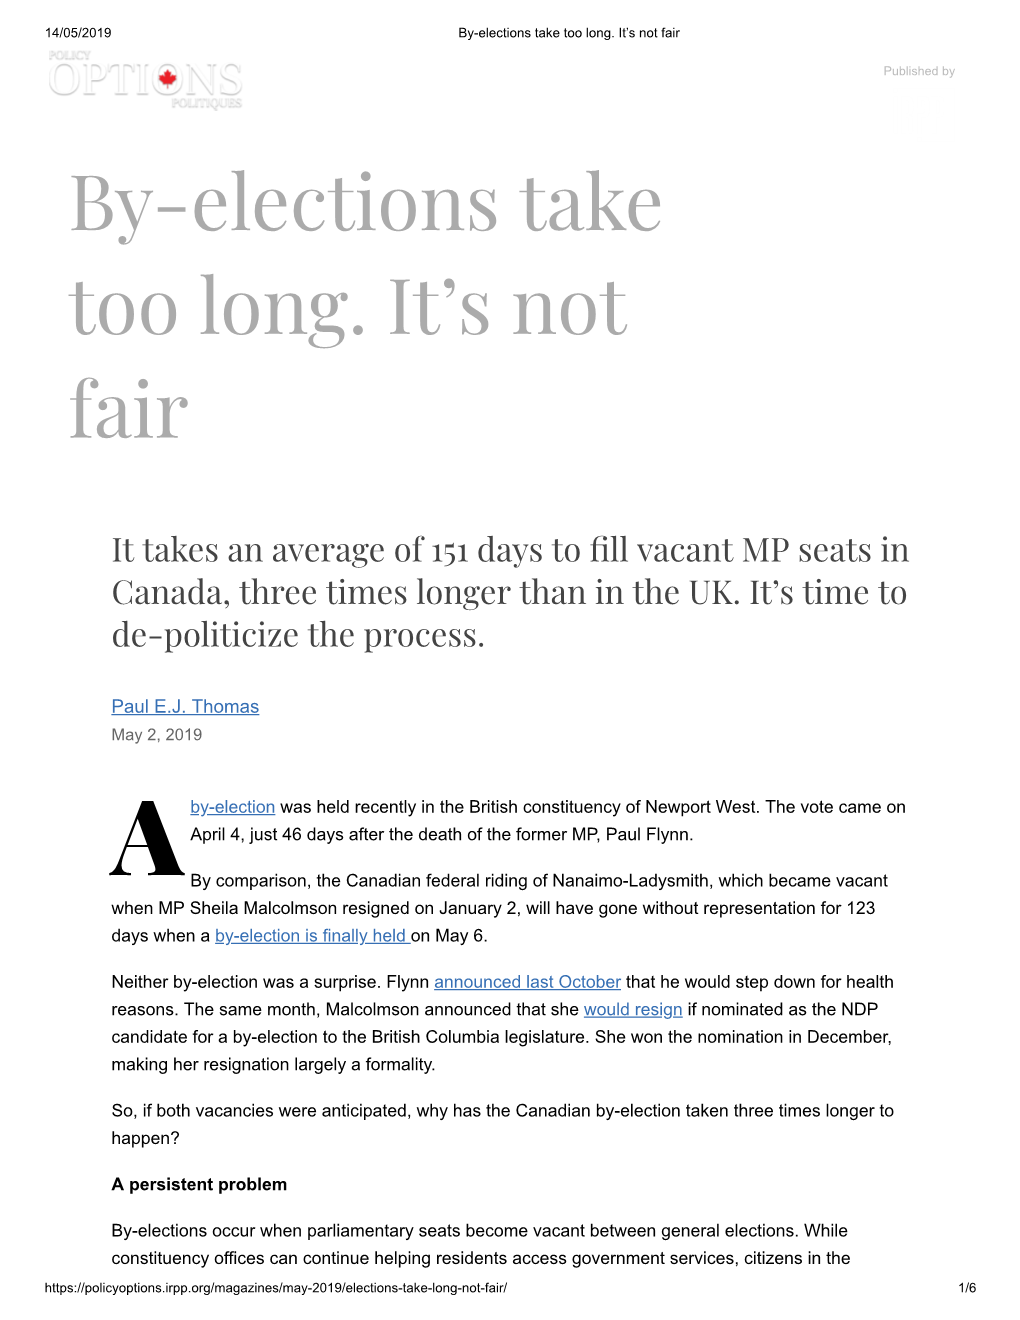 By-Elections Take Too Long. It's Not Fair